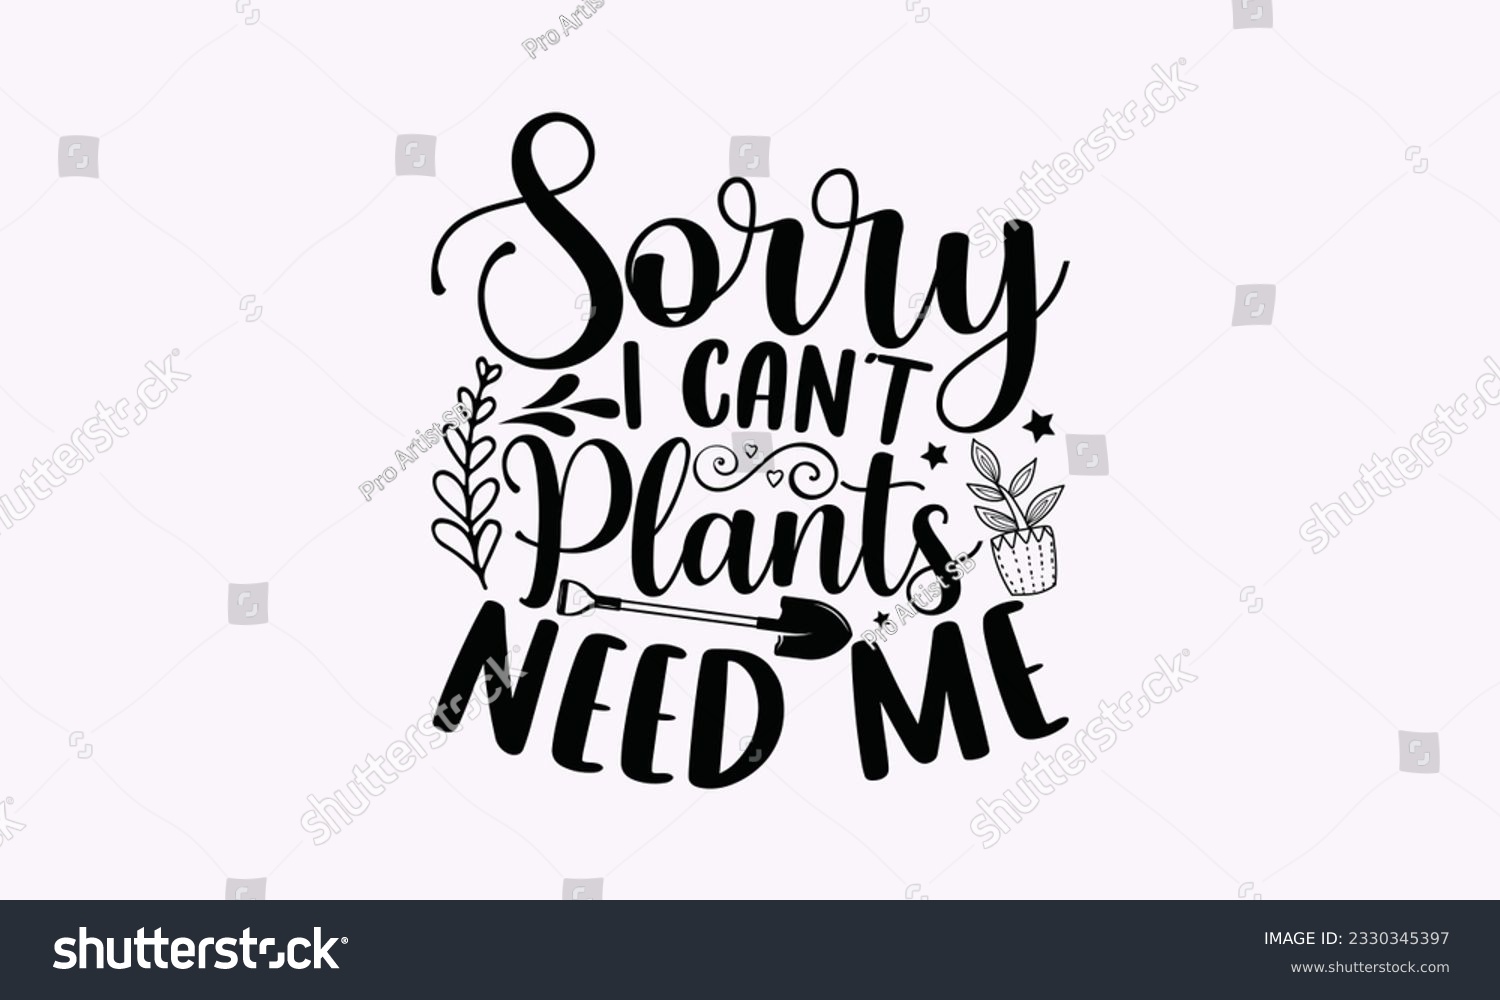 SVG of Sorry I can’t plants need me - Gardening SVG Design, plant Quotes, Hand drawn lettering phrase, Isolated on white background. svg